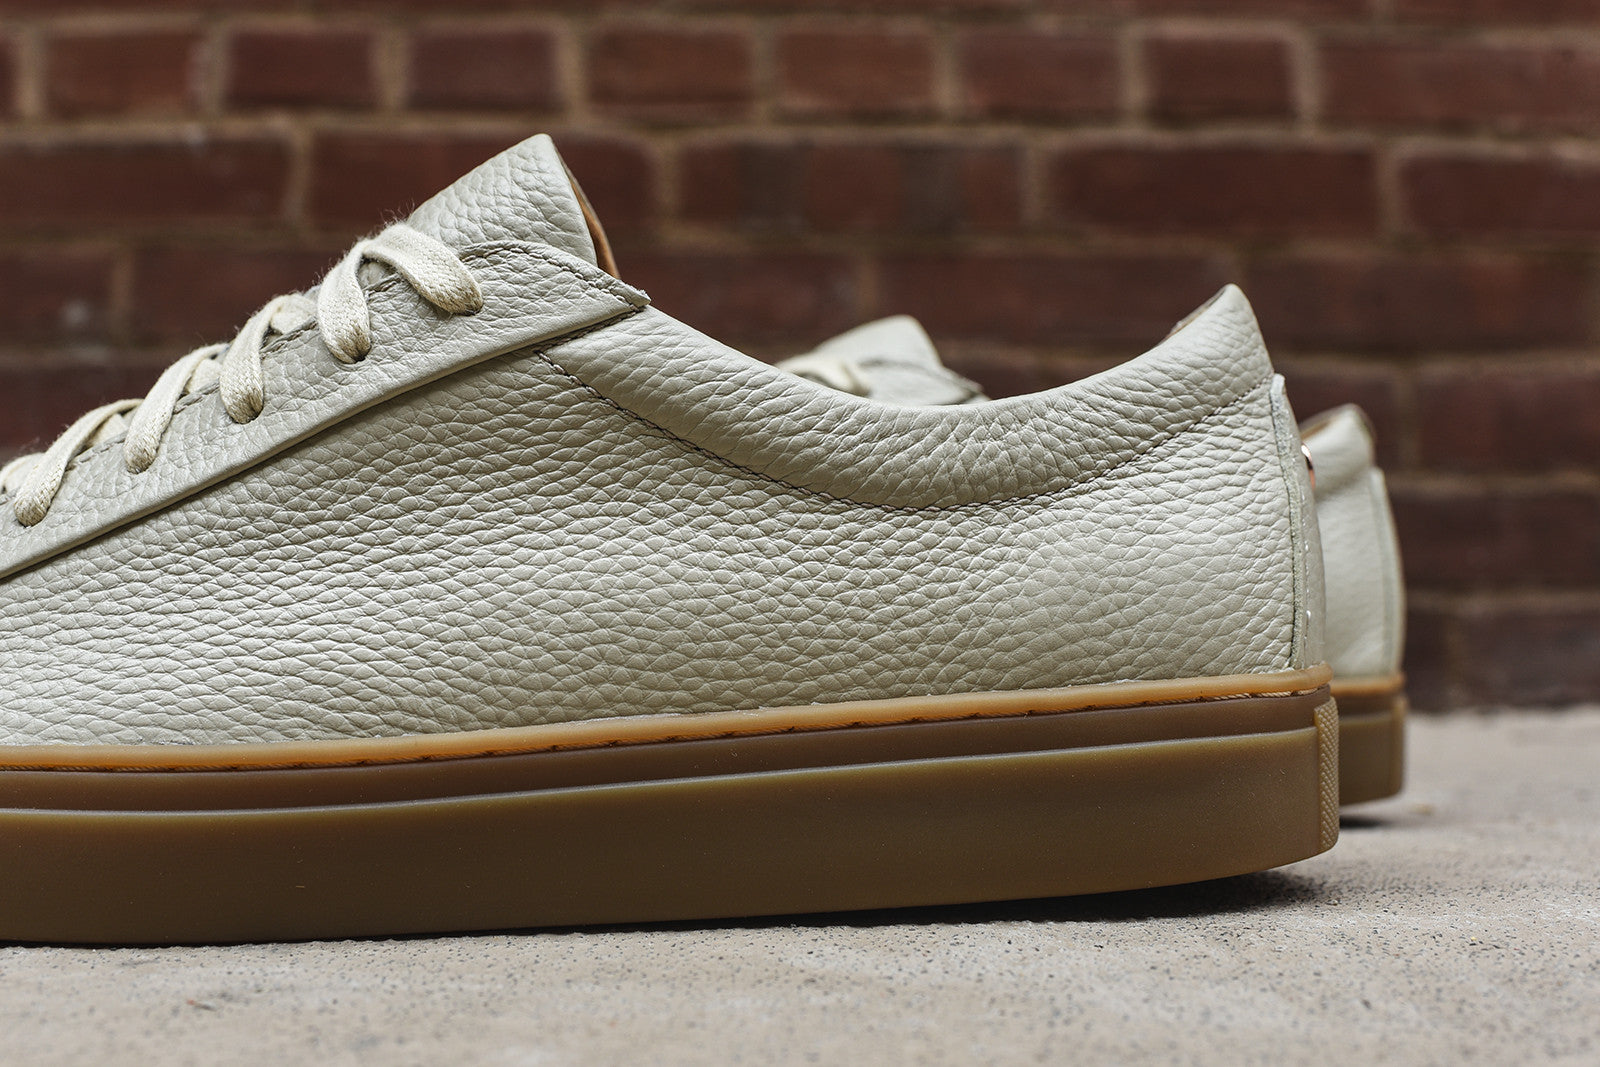 TCG Kennedy Low - Off White / Gum – Kith